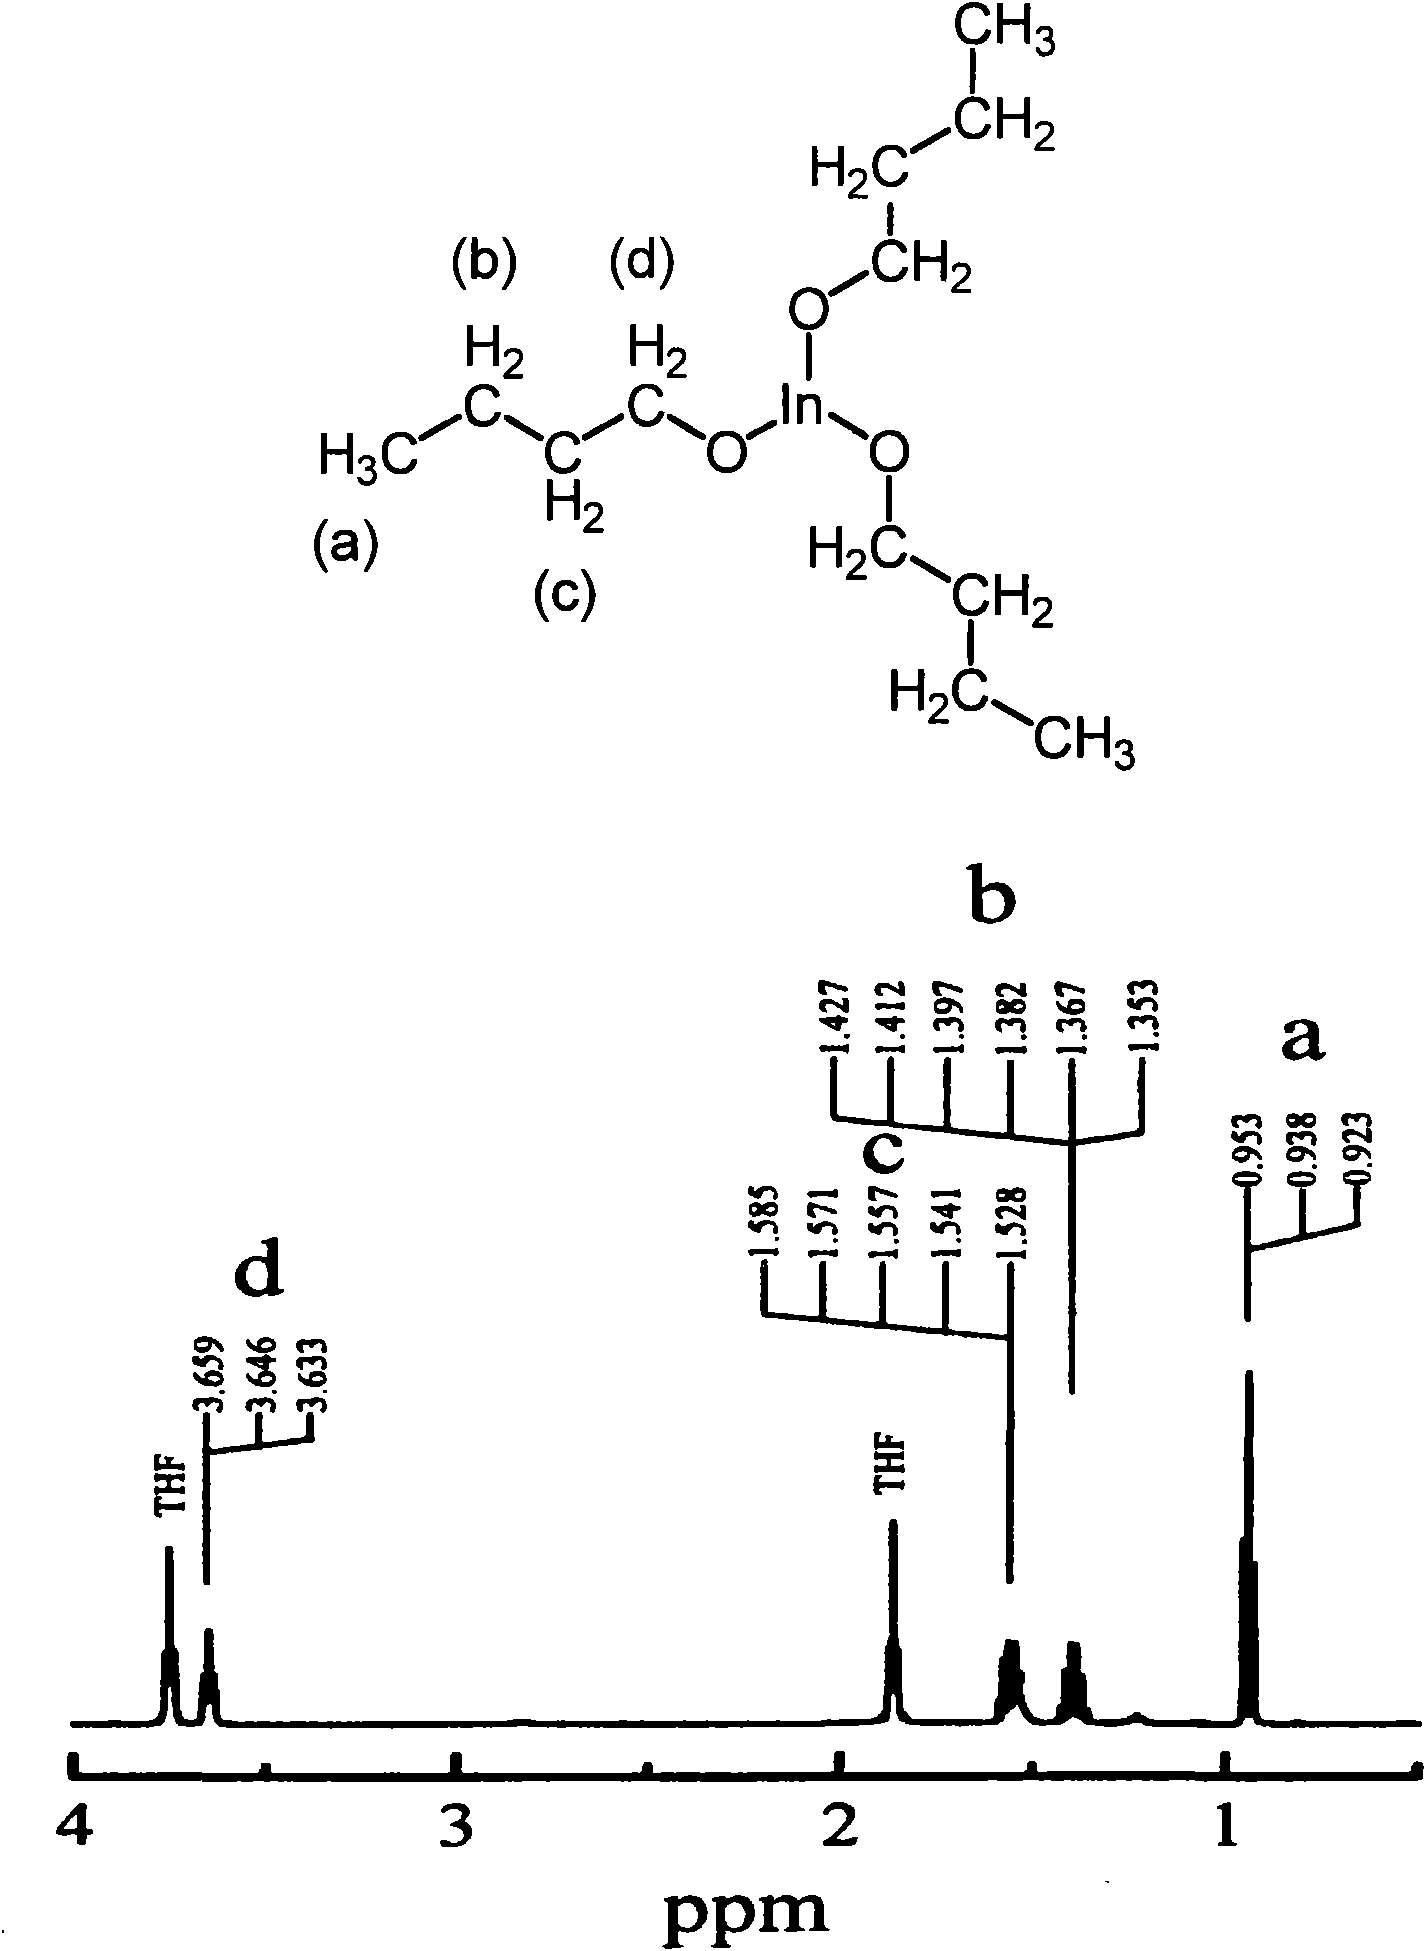 Method for preparing composition containing indium alcoholate and tin alcoholate and composition containing indium alcoholate and tin alcoholate prepared thereby